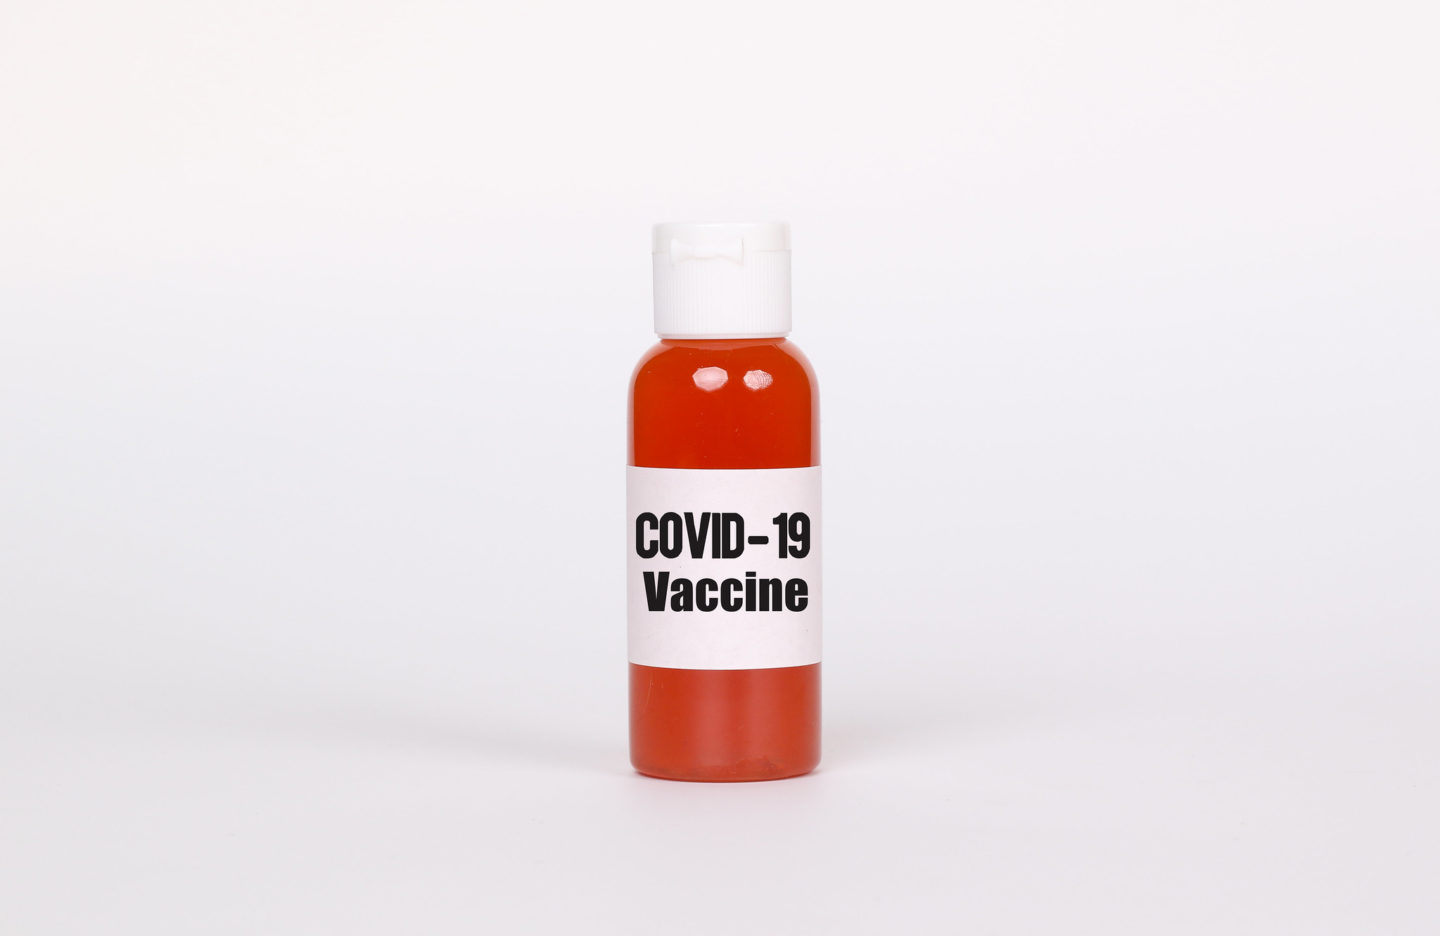 COVID-19 vaccine: a new race of the superpowers